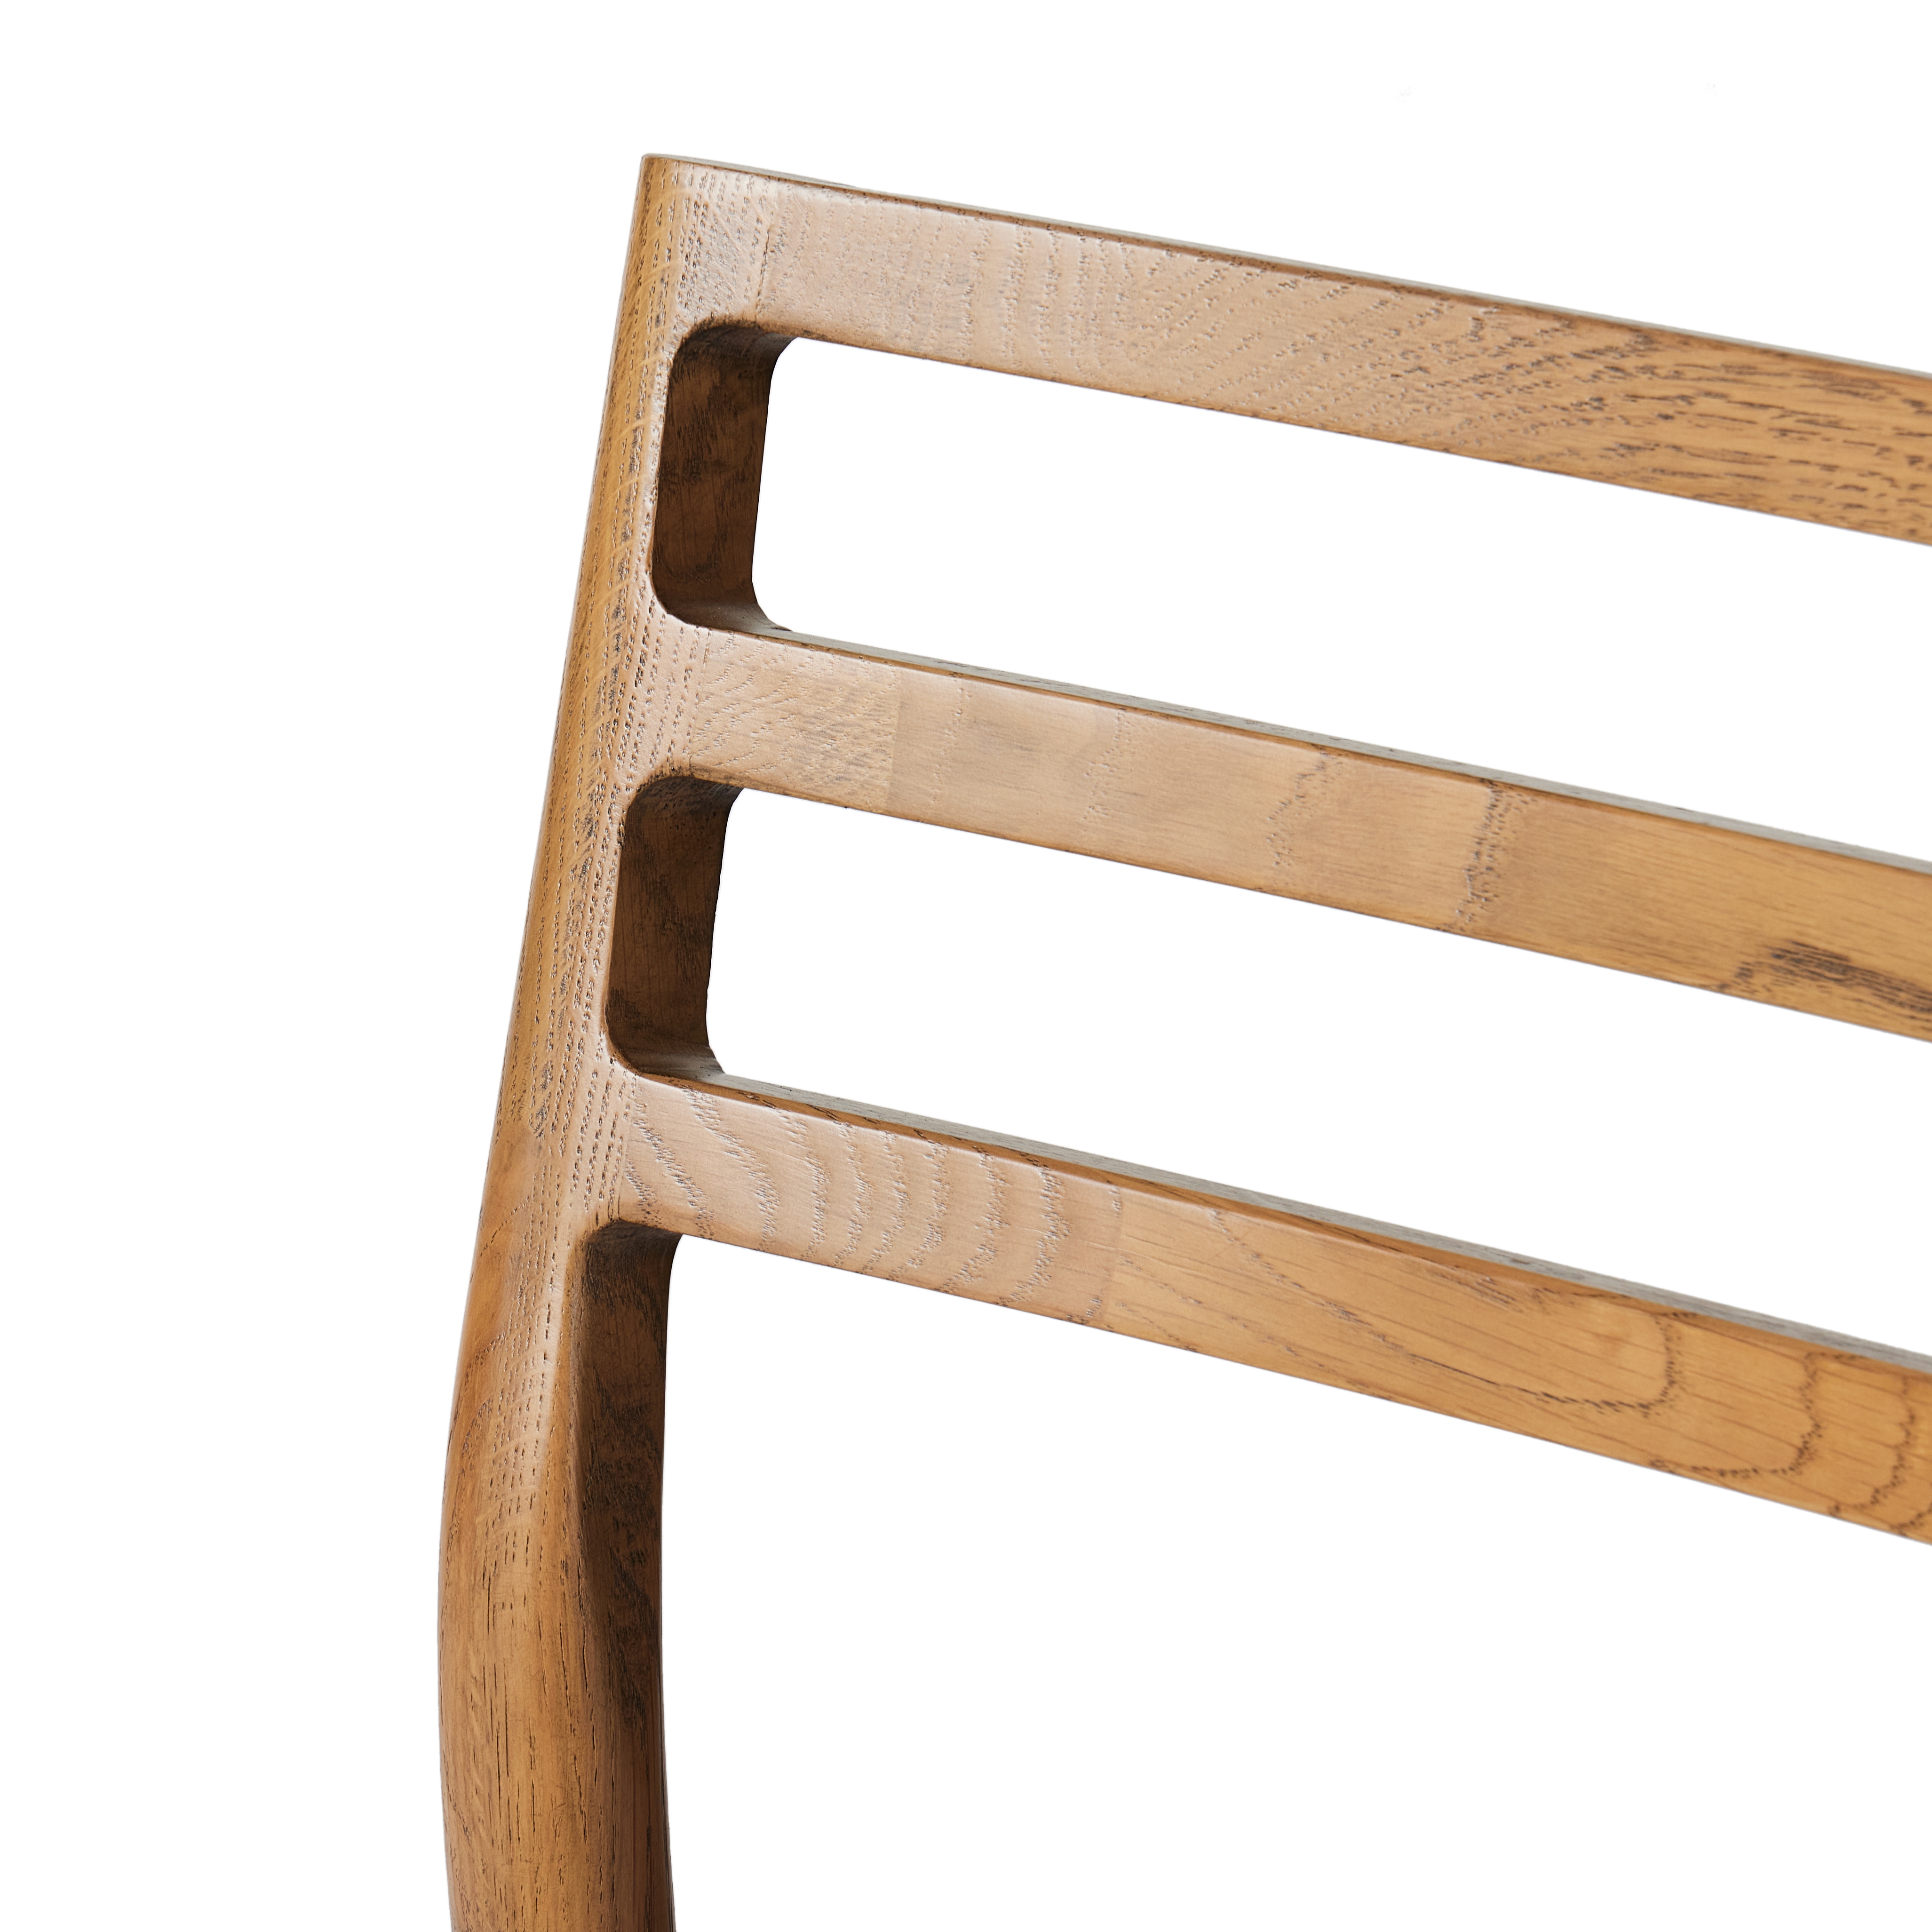 Glenmore Dining Chair-Smoked Oak - Image 6